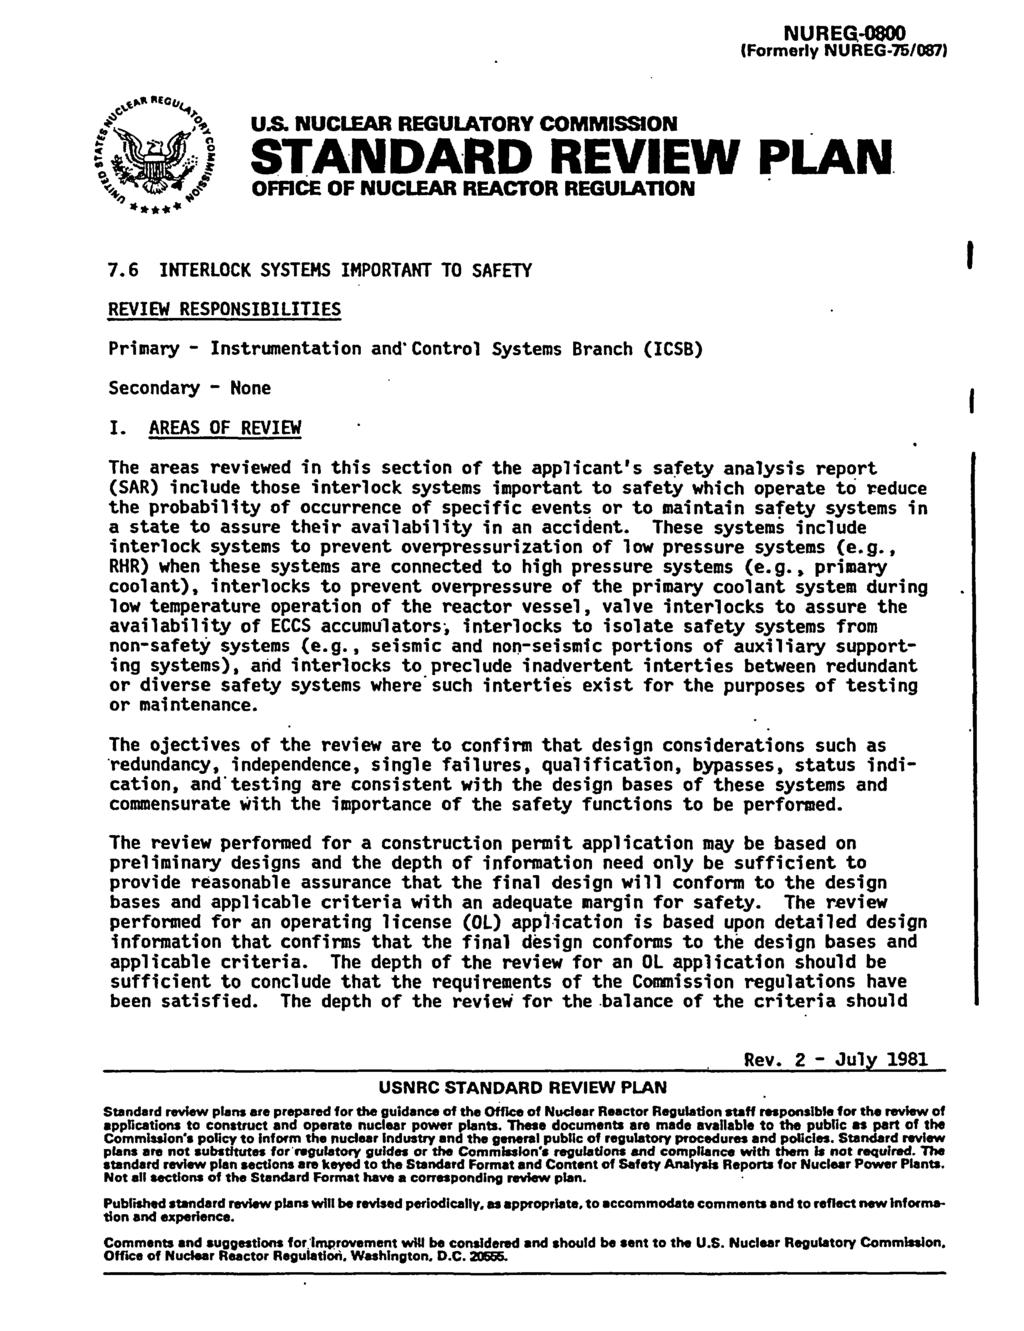 NUREQ-0800 (Formerly NUREG-75/087) US. NUCLEAR REGULATORY COMMISSION t ams.t.andard REVIEW PLAN. OFFICE OF NUCLEAR REACTOR REGULATION 7.